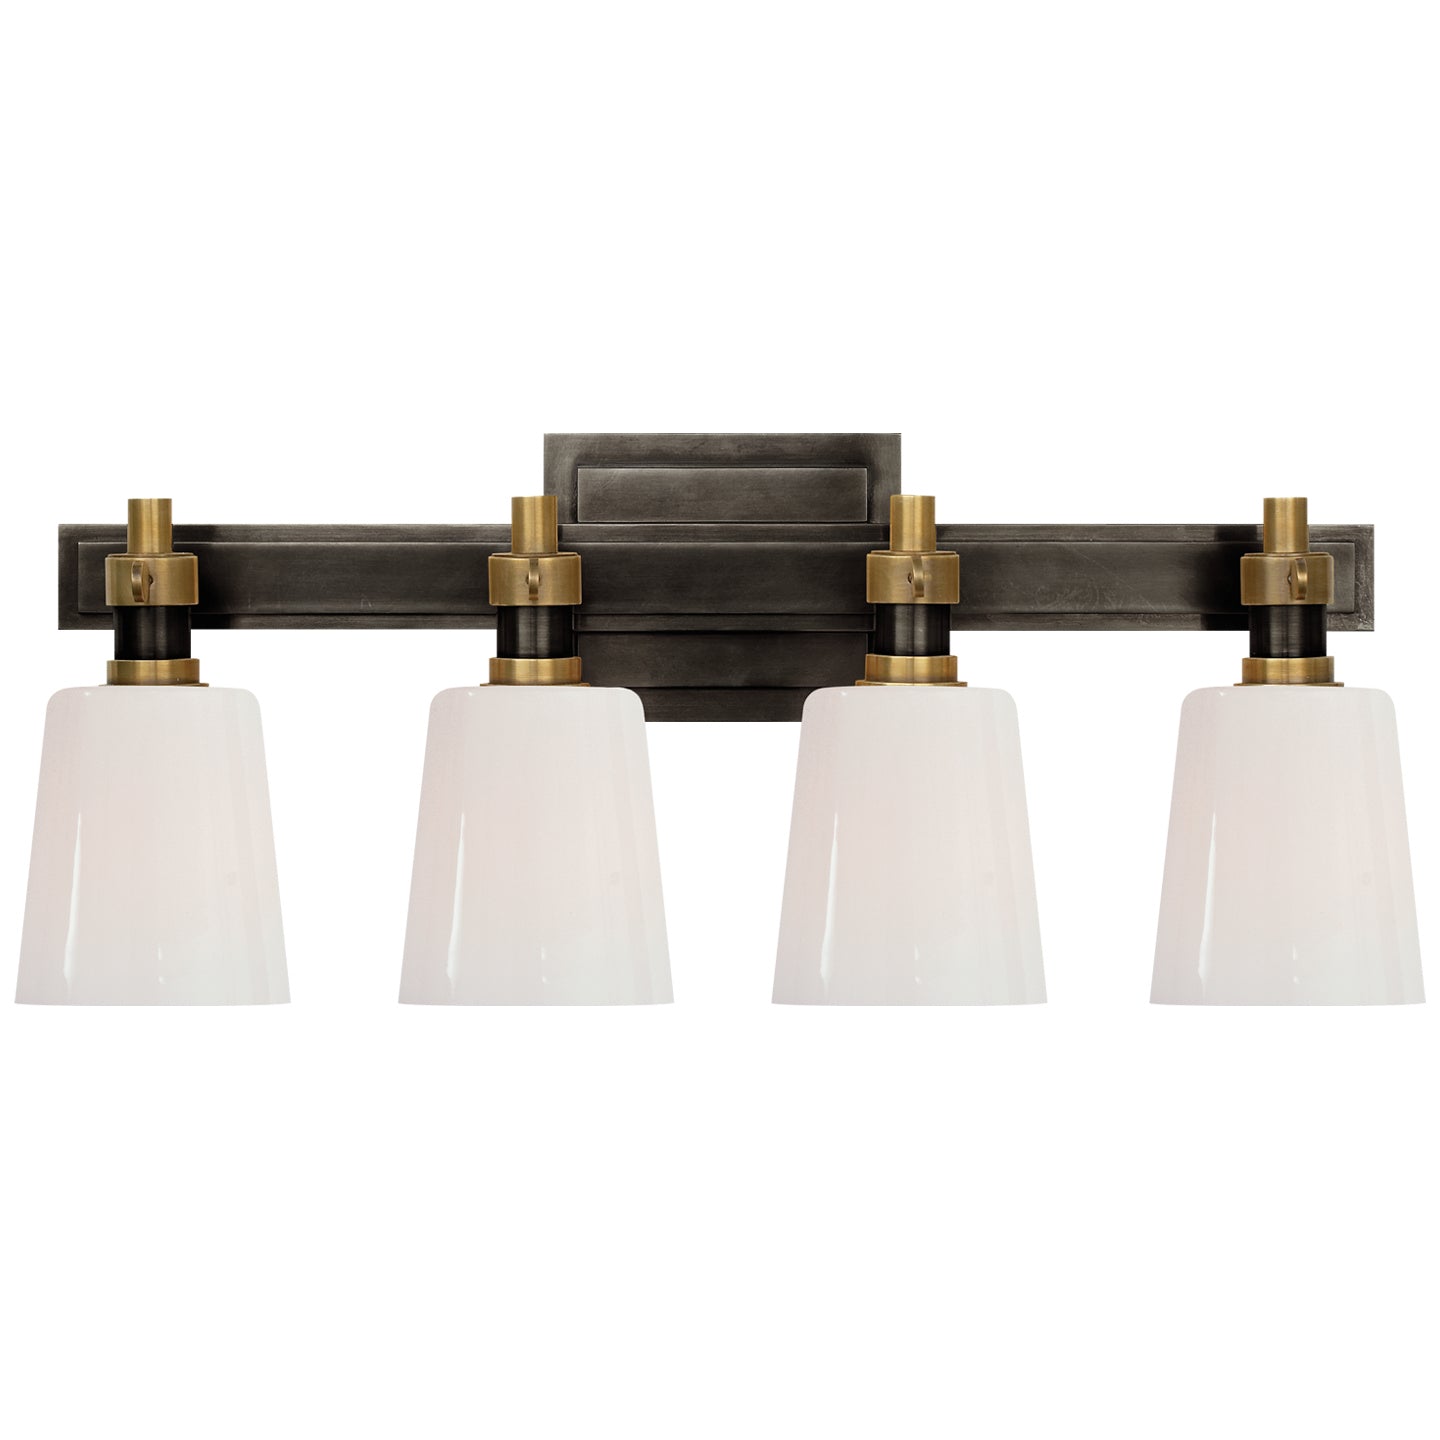 Load image into Gallery viewer, Visual Comfort Signature - TOB 2153BZ/HAB-WG - Four Light Bath Lighting - Bryant Bath - Bronze and Hand-Rubbed Antique Brass
